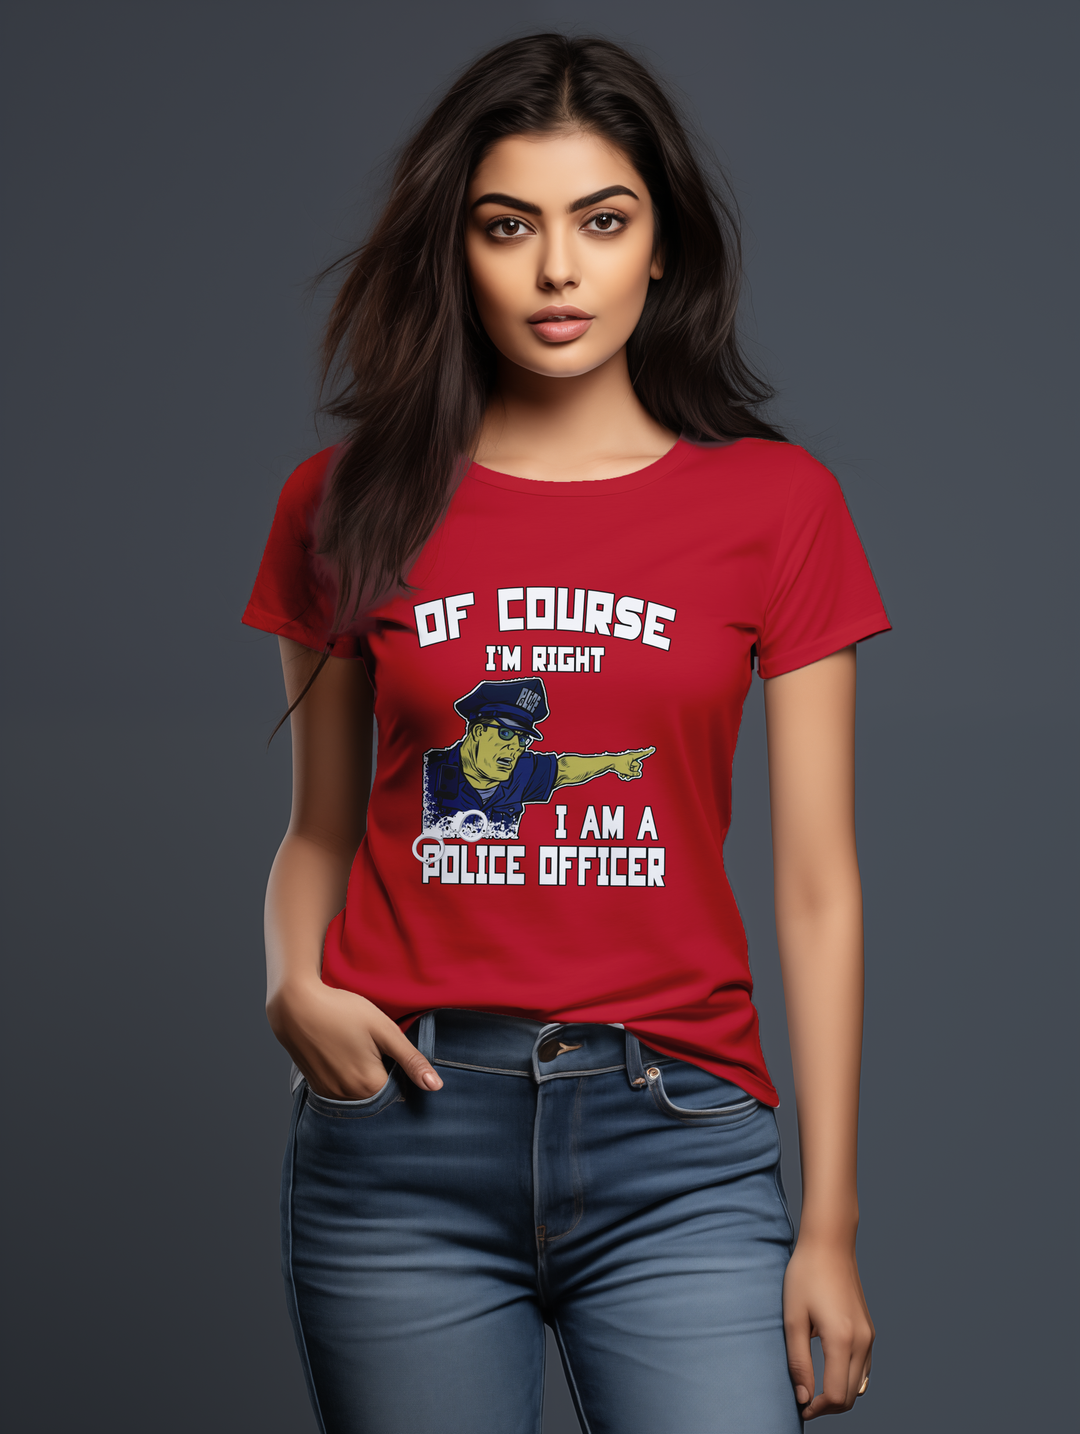 Womens Red OfCourse I'm a Police Officer tee